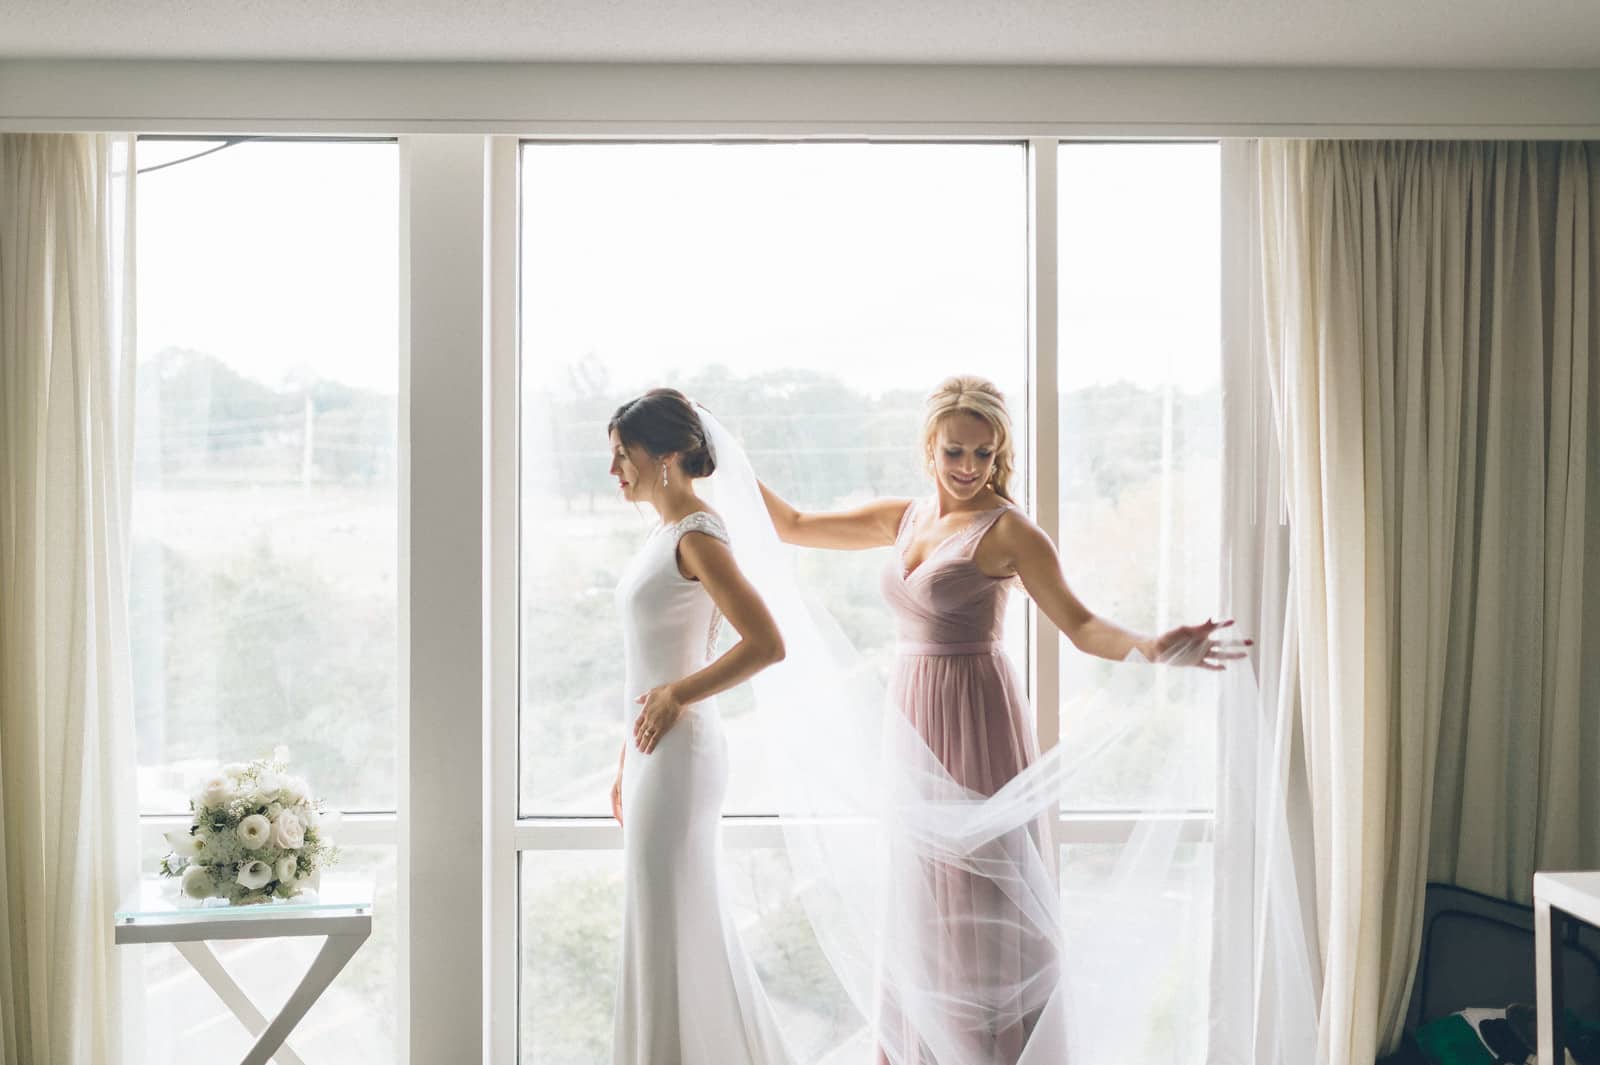 Understanding the Different Kinds of Wedding Photography - Light & Airy Examples of NJ Wedding Photographer Ben Lau.